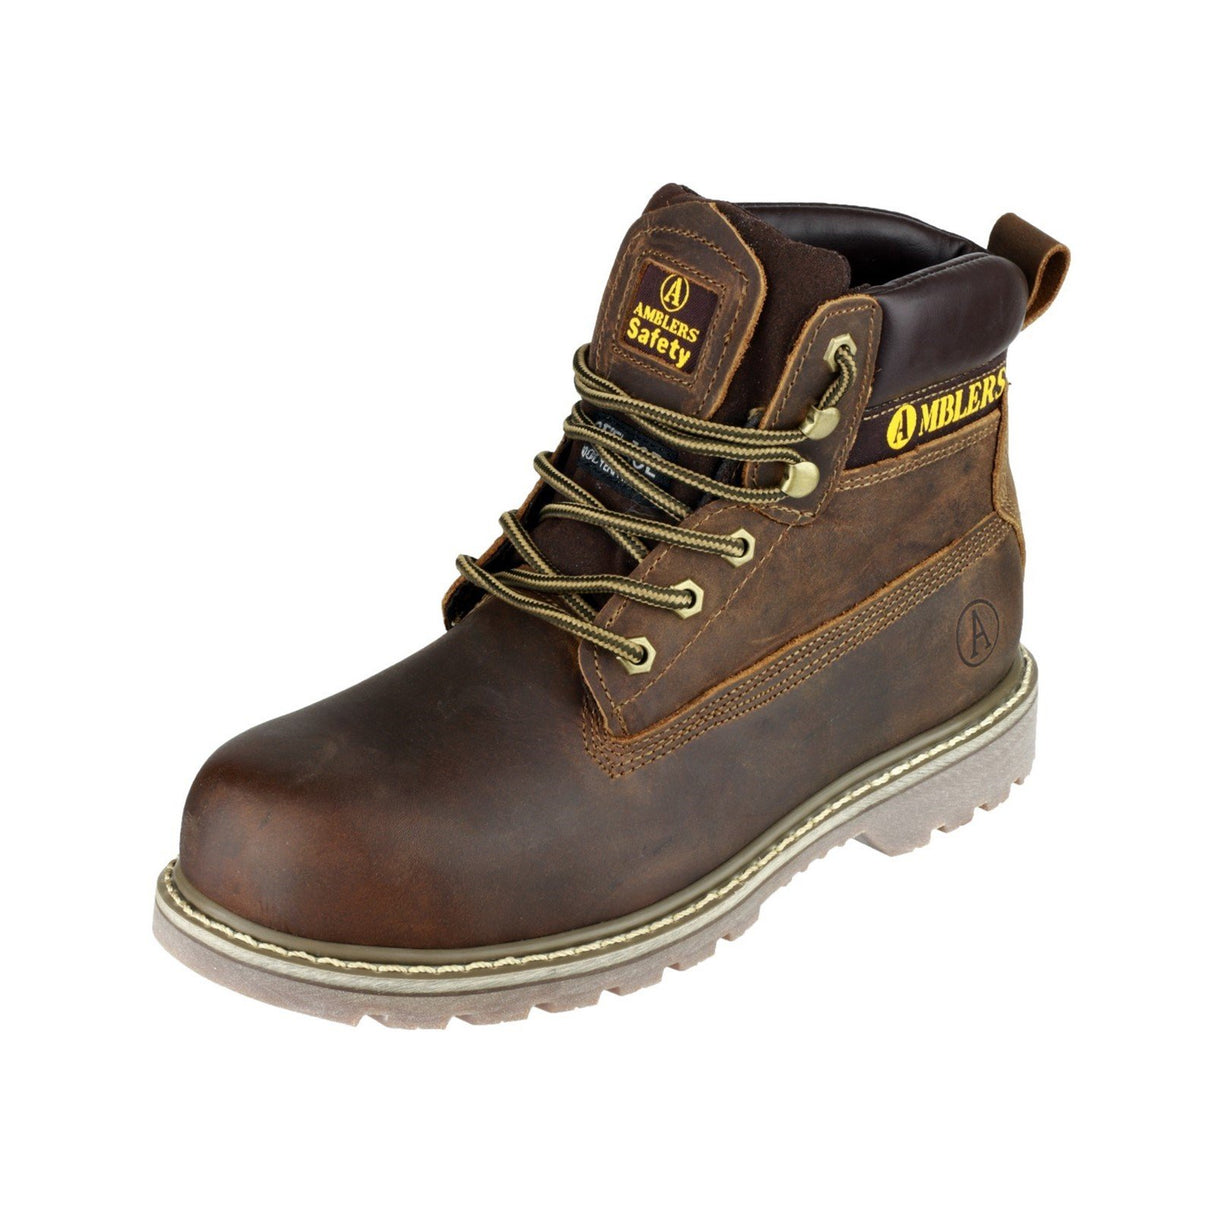 Amblers Safety Goodyear Welted Steel Toe Cap Brown Safety Boots